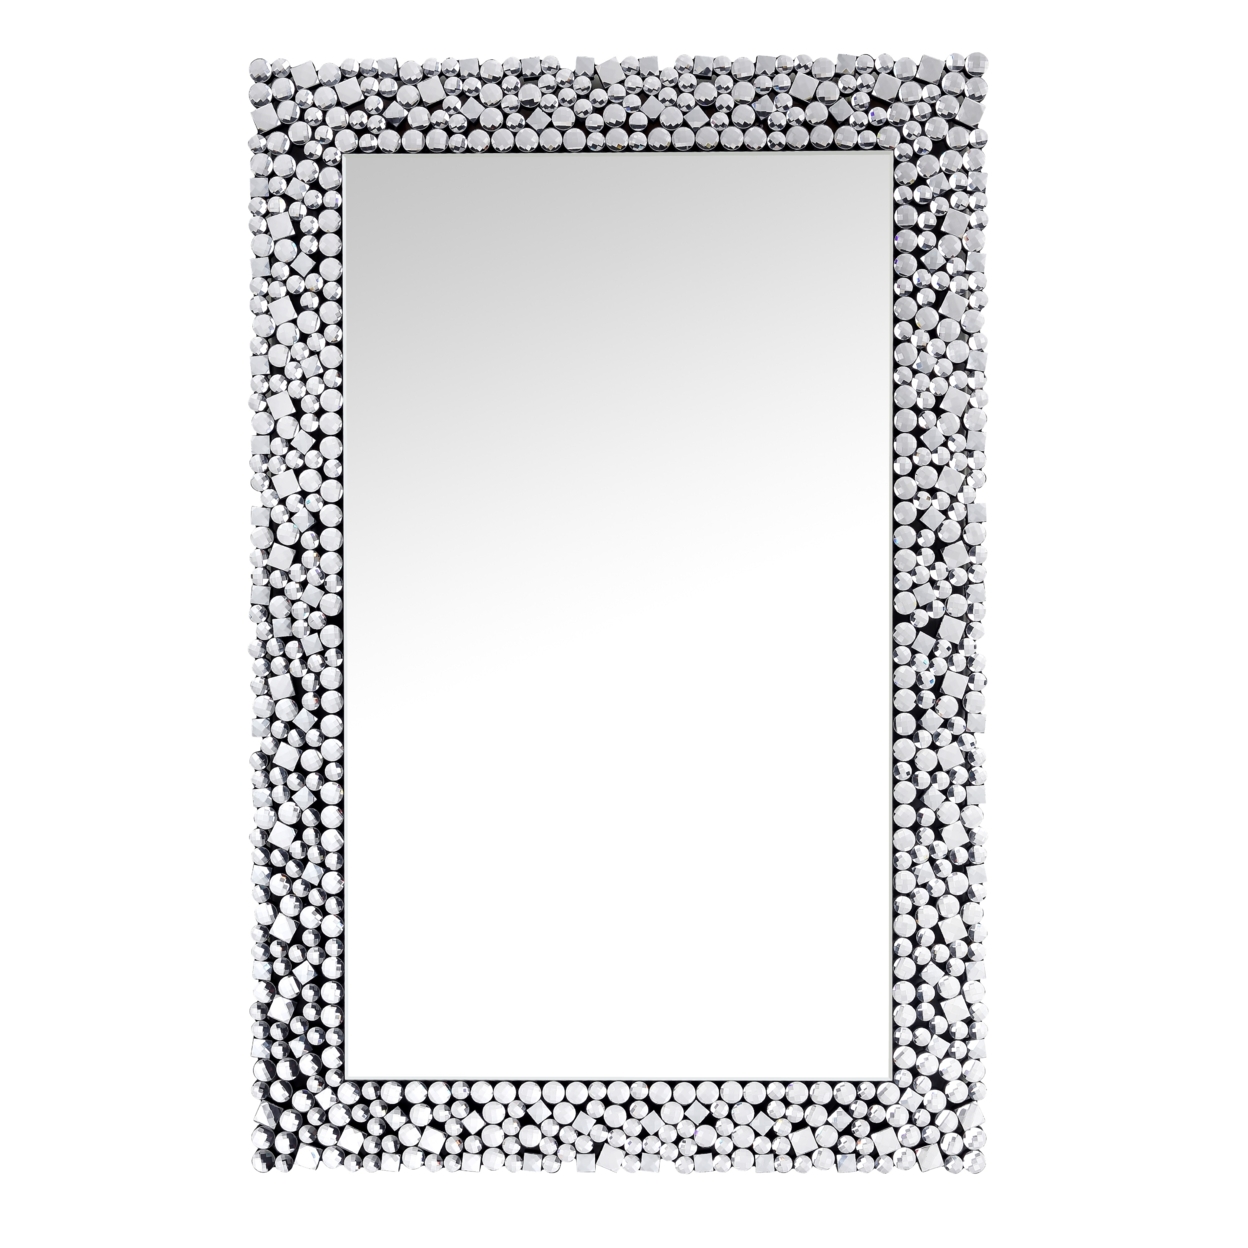 Sparkling Wall Decor With Beveled Edges And Faux Gem Inlay, Silver- Saltoro Sherpi